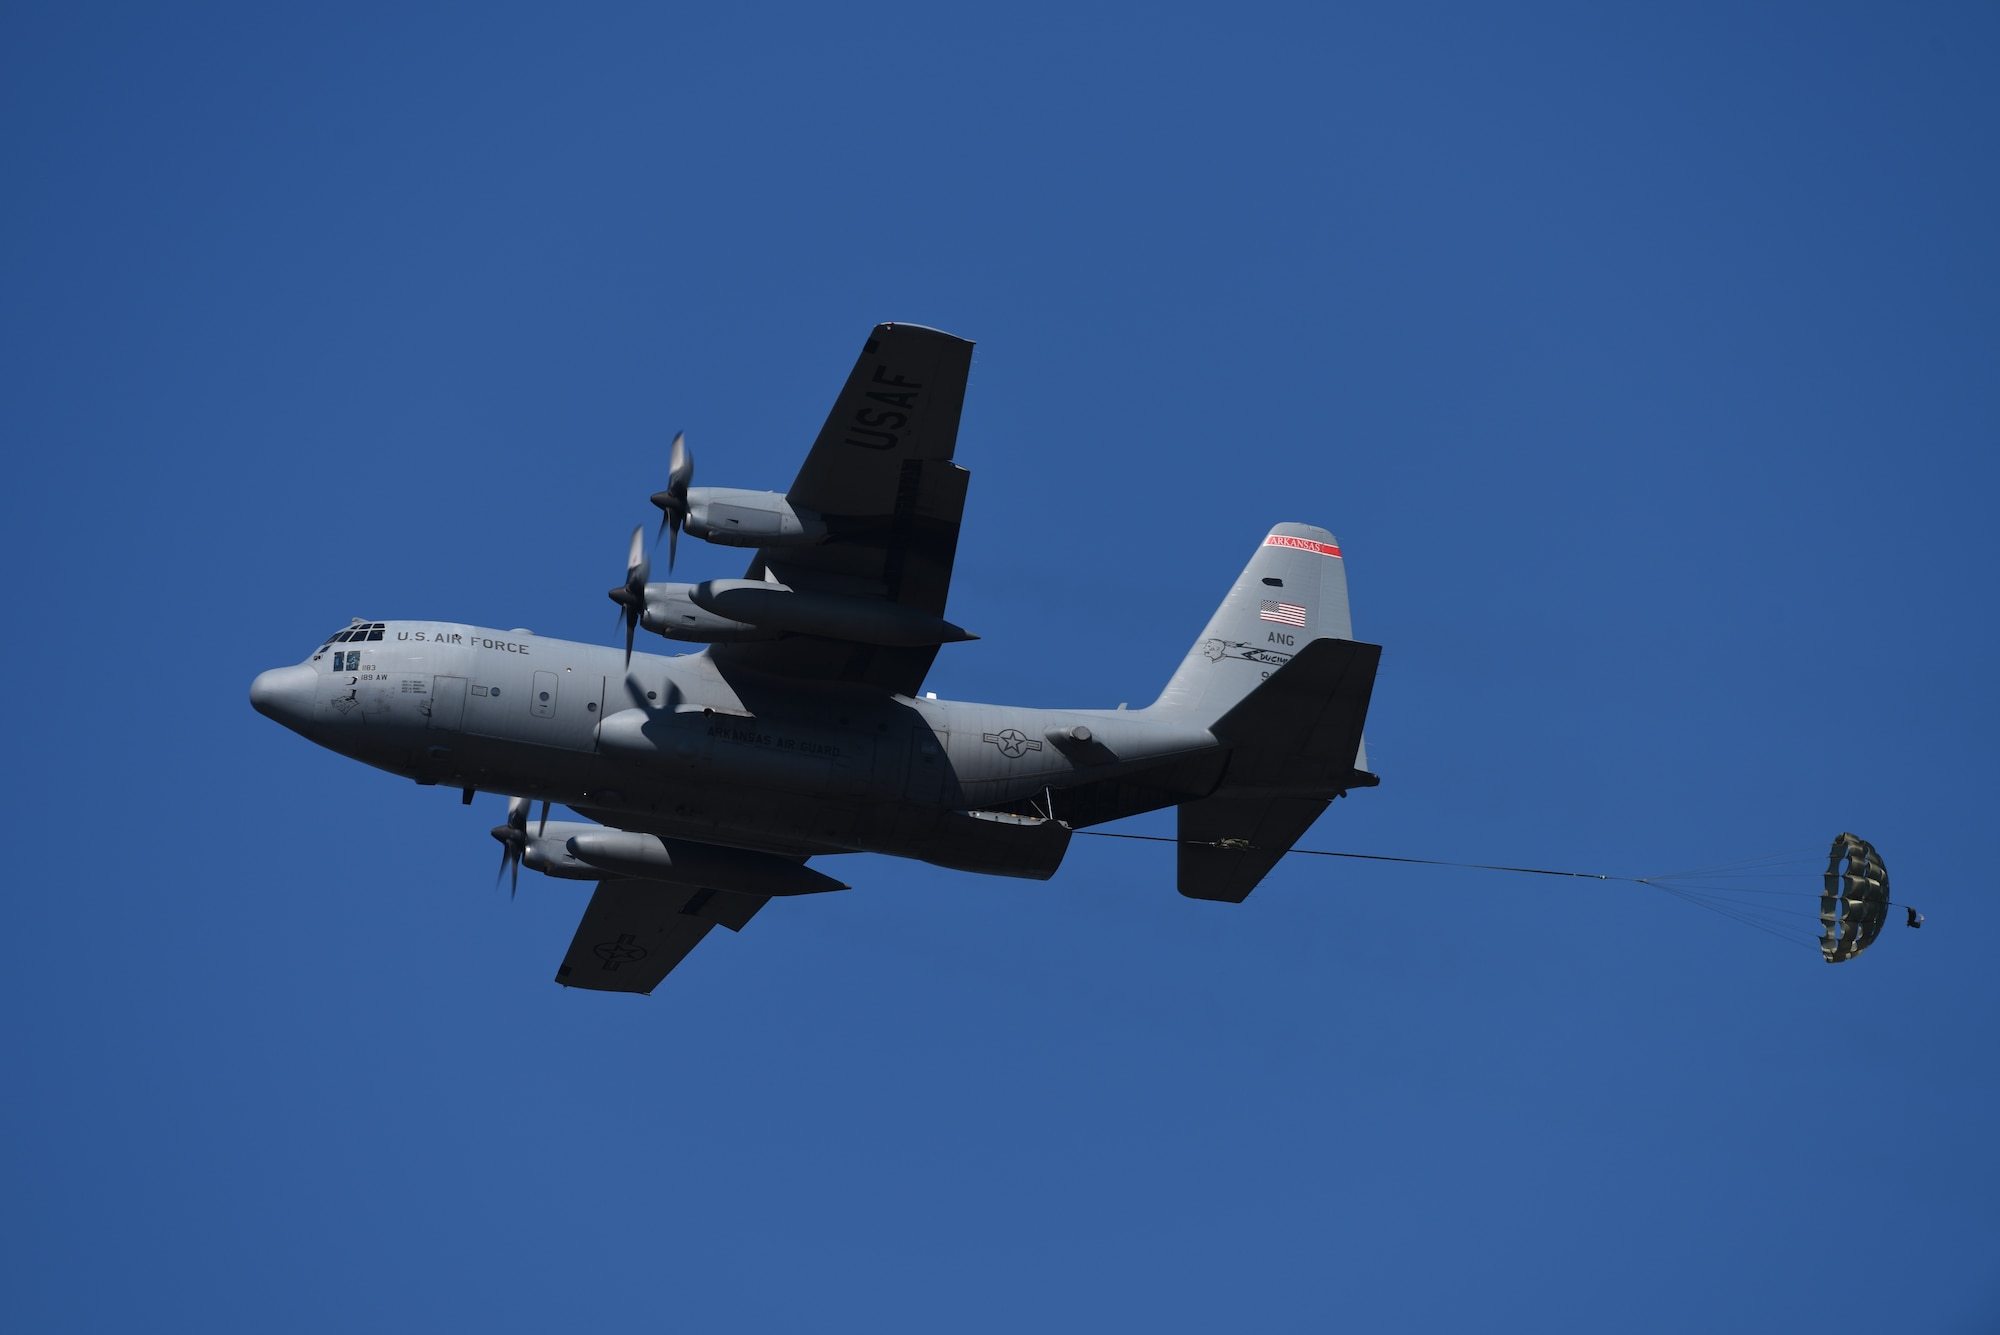 A gray C-130 releases cargo attached to a parachute